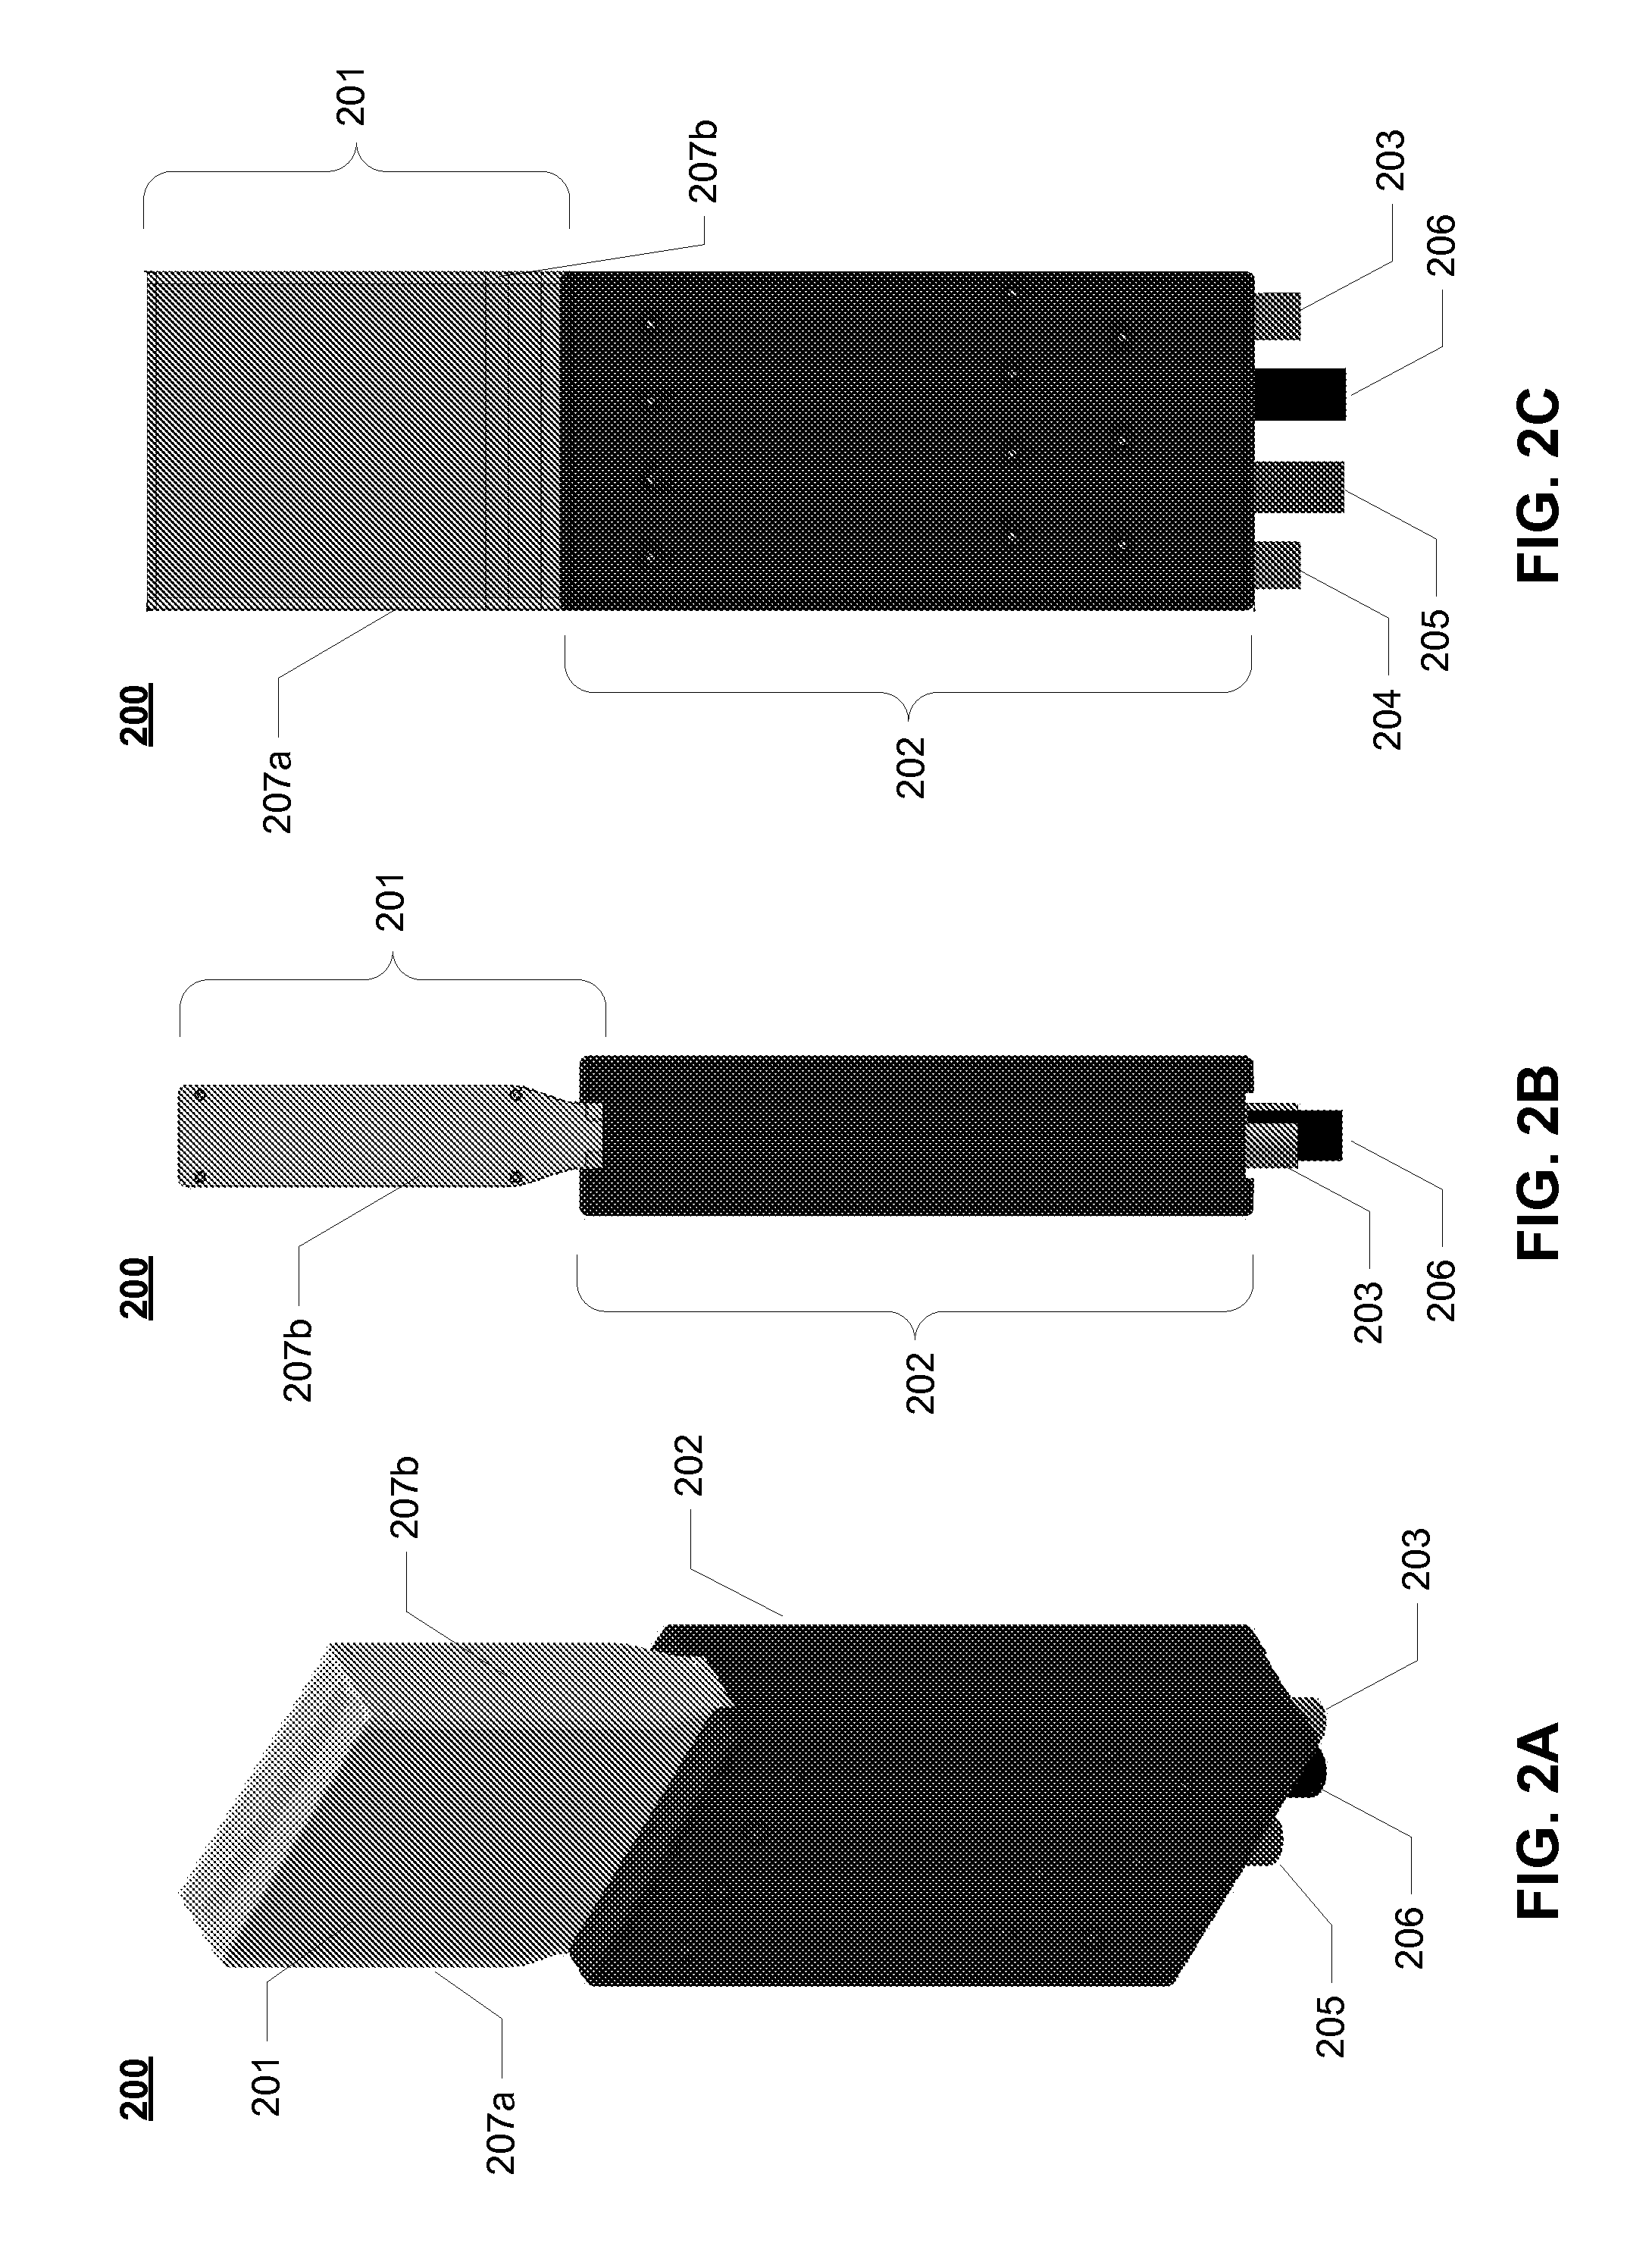 Micro-channel-cooled high heat load light emitting device